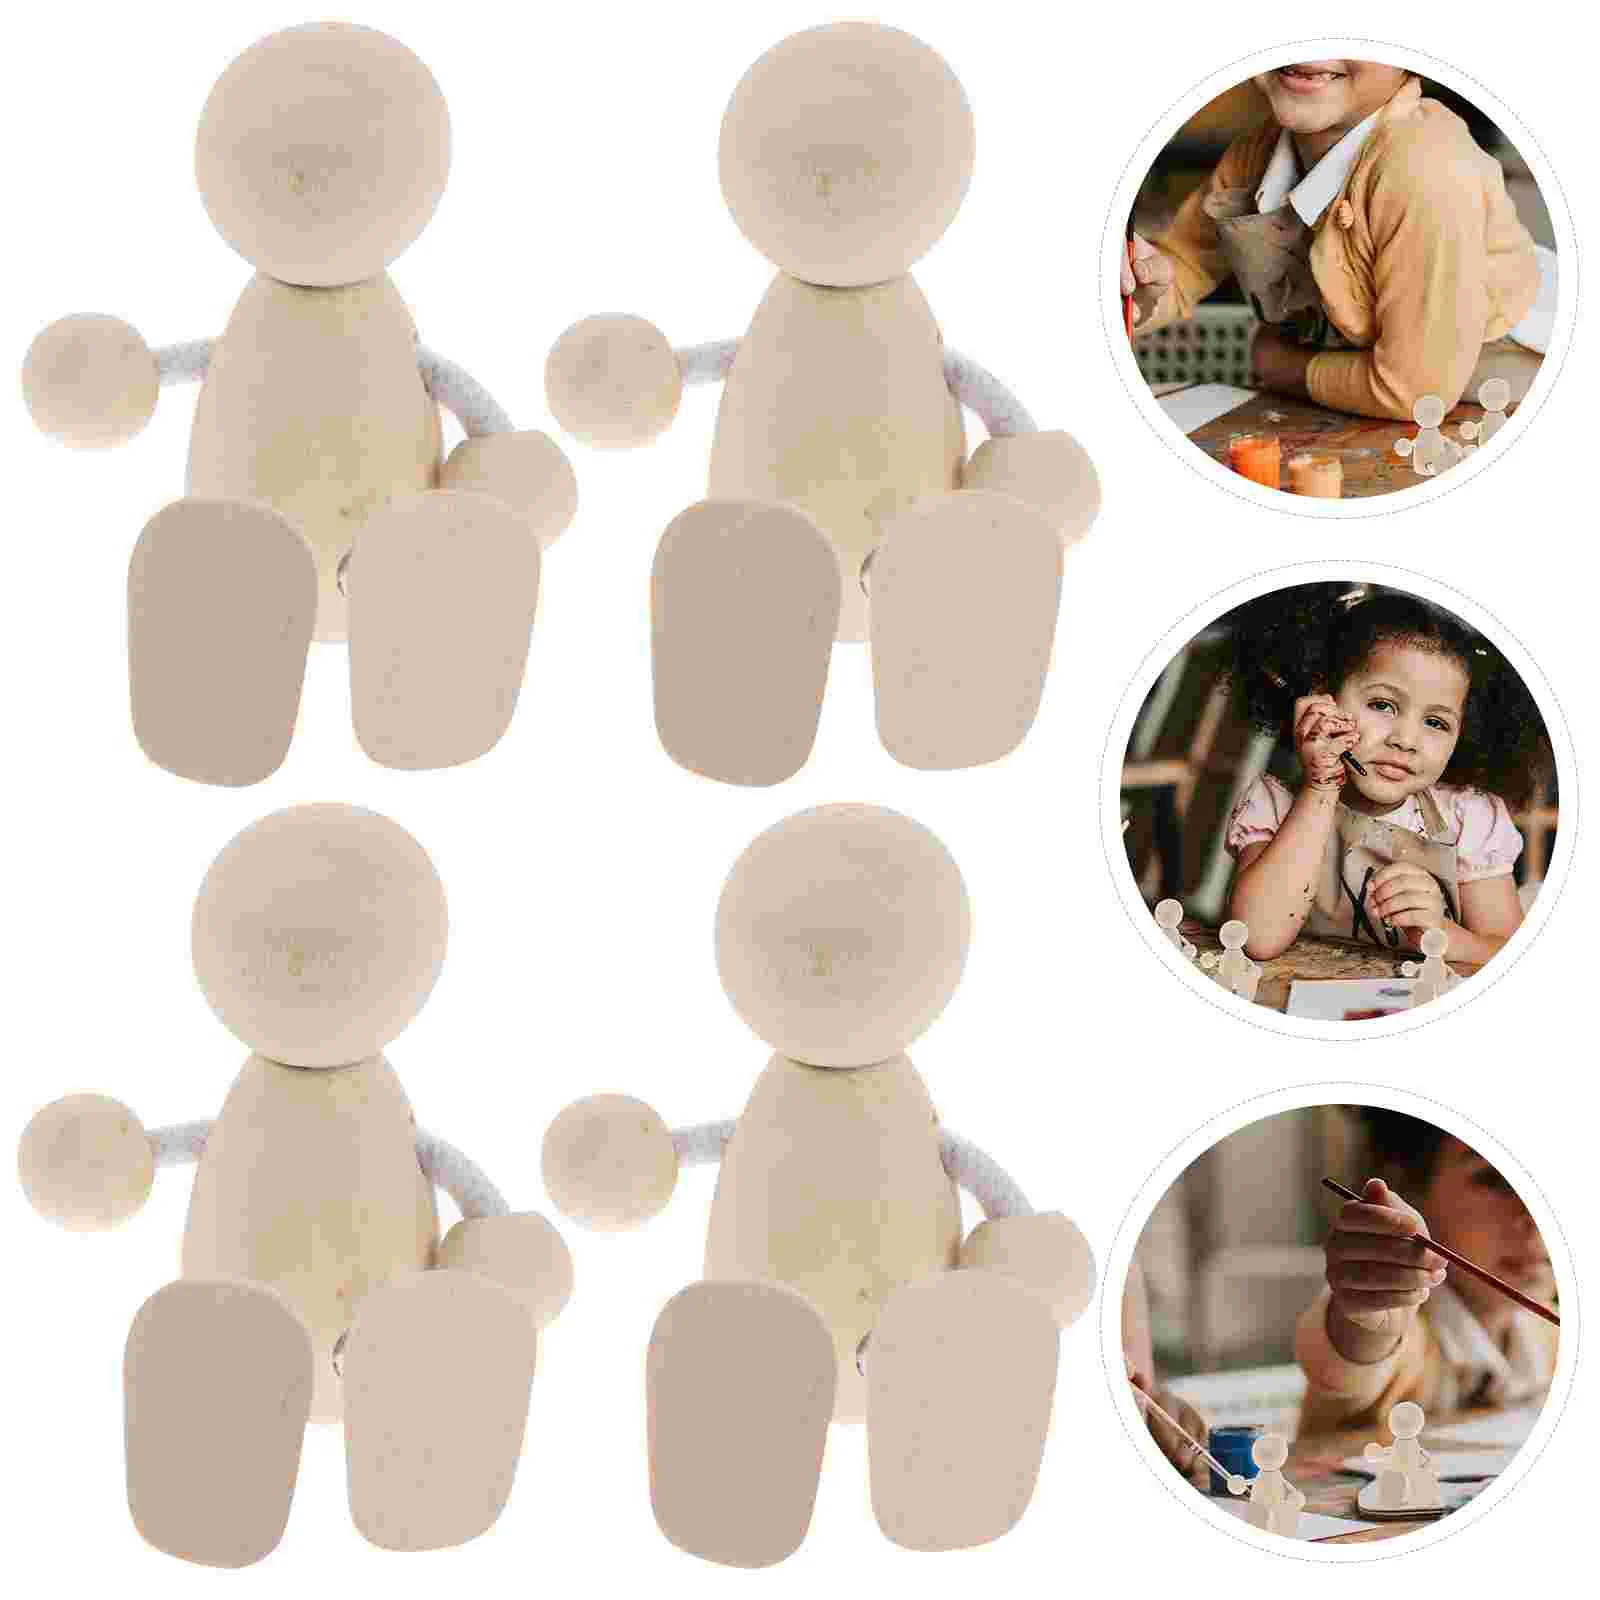 

4 Pcs Peg People Wooden Graffiti Plaything Figurines Playset Toy Decor Unfinished Small Items Shelf Child Mannequin